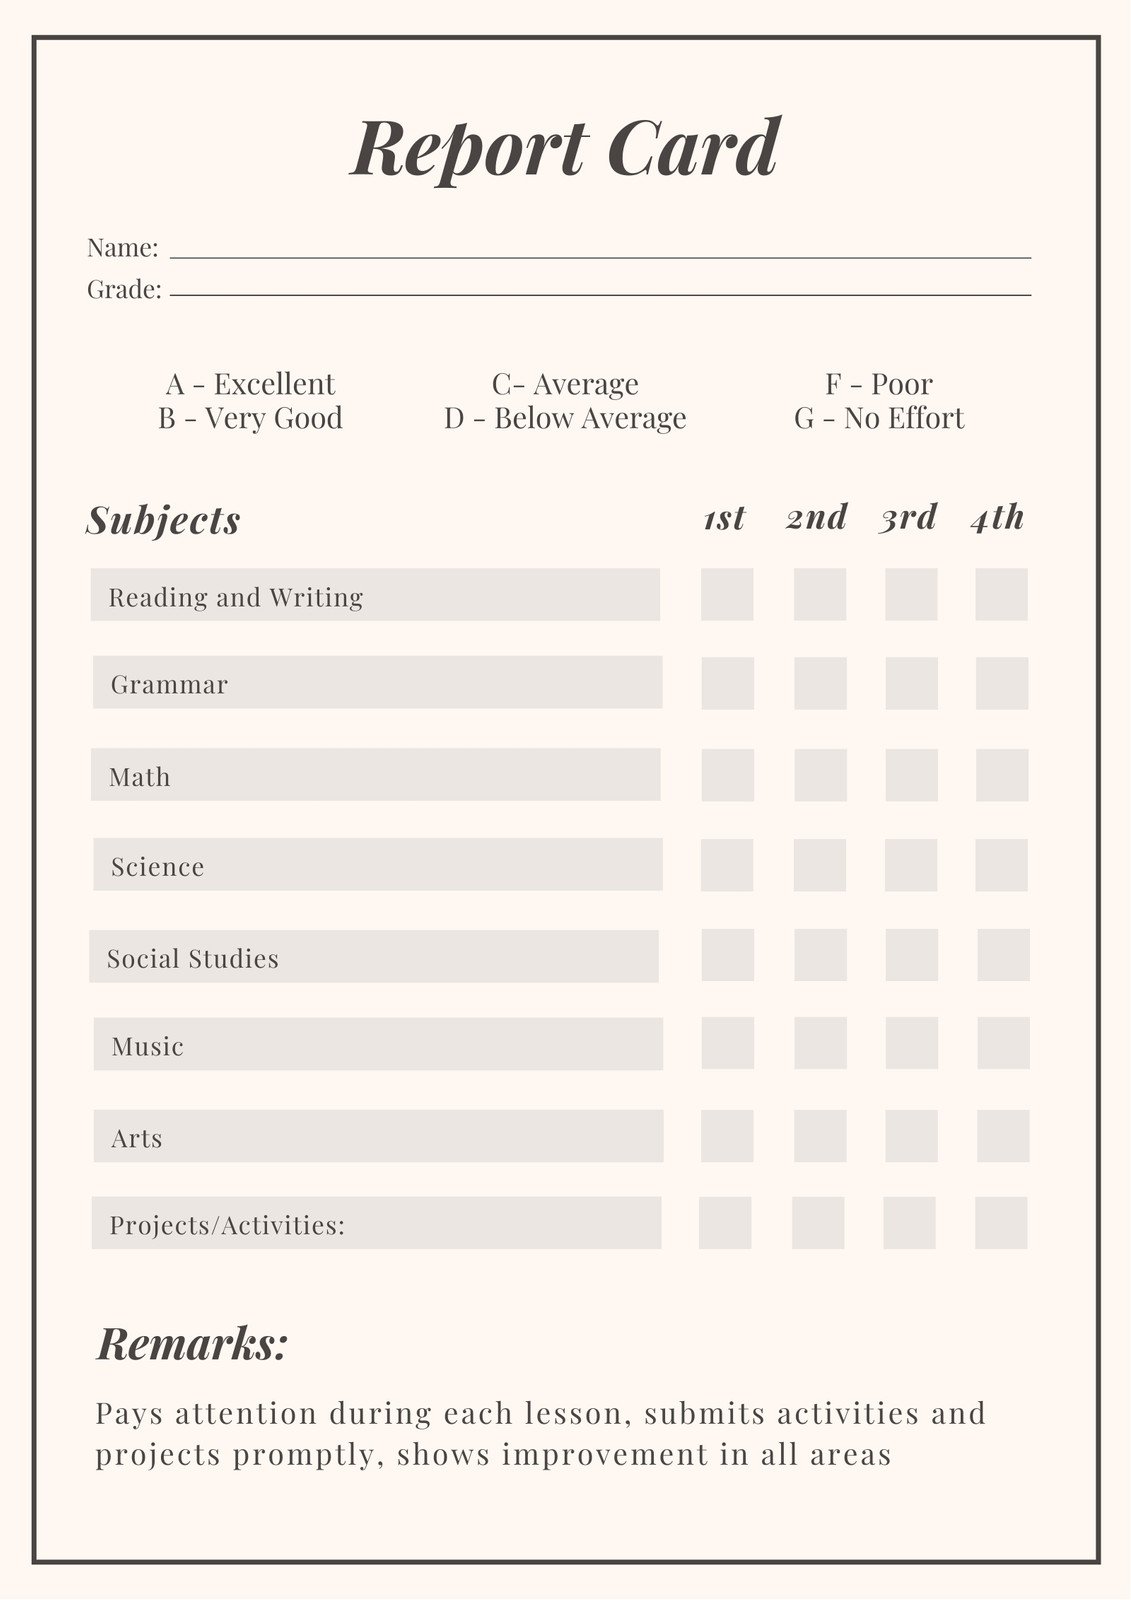 Free, printable, customizable report card templates  Canva With Regard To Boyfriend Report Card Template